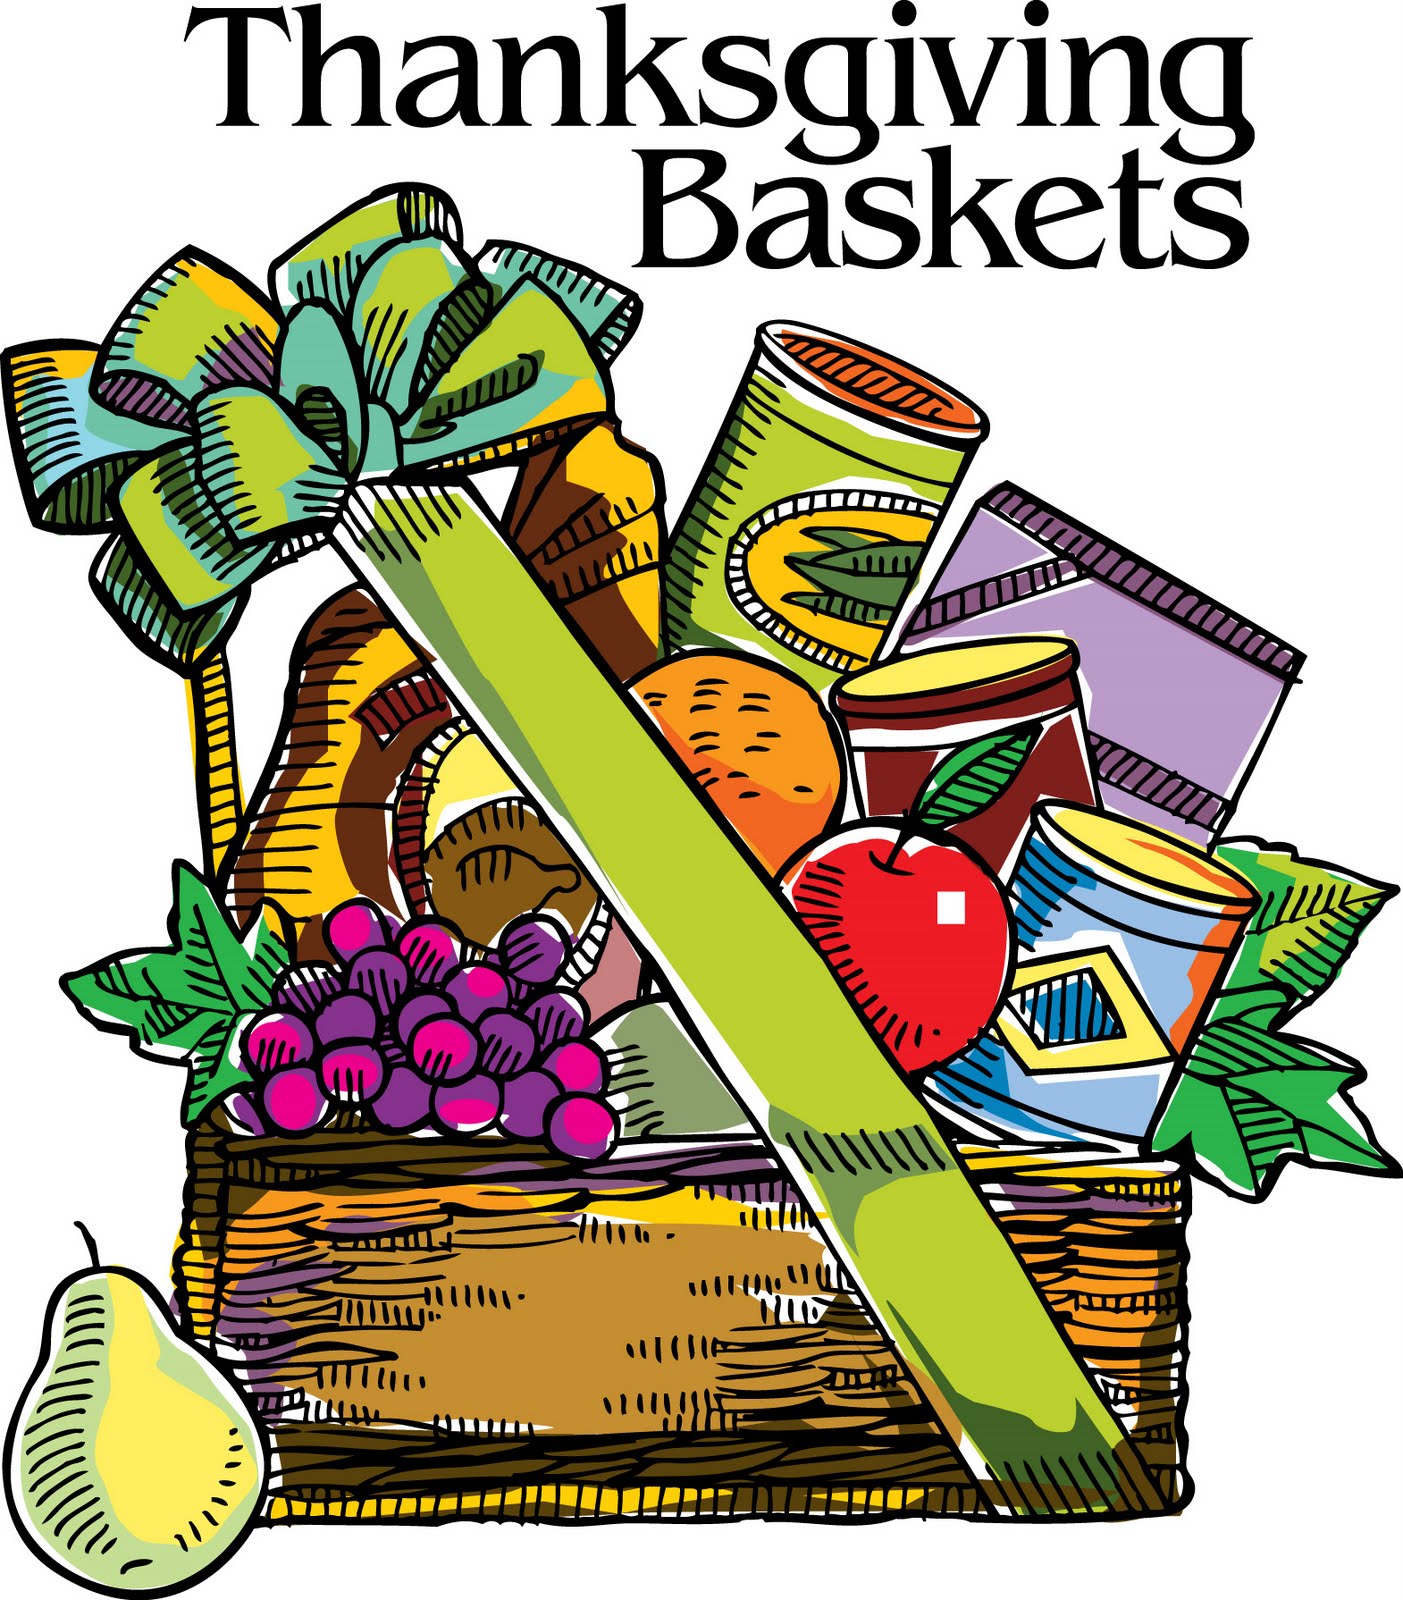 Thanksgiving food basket clipart black and white - ClipartFox